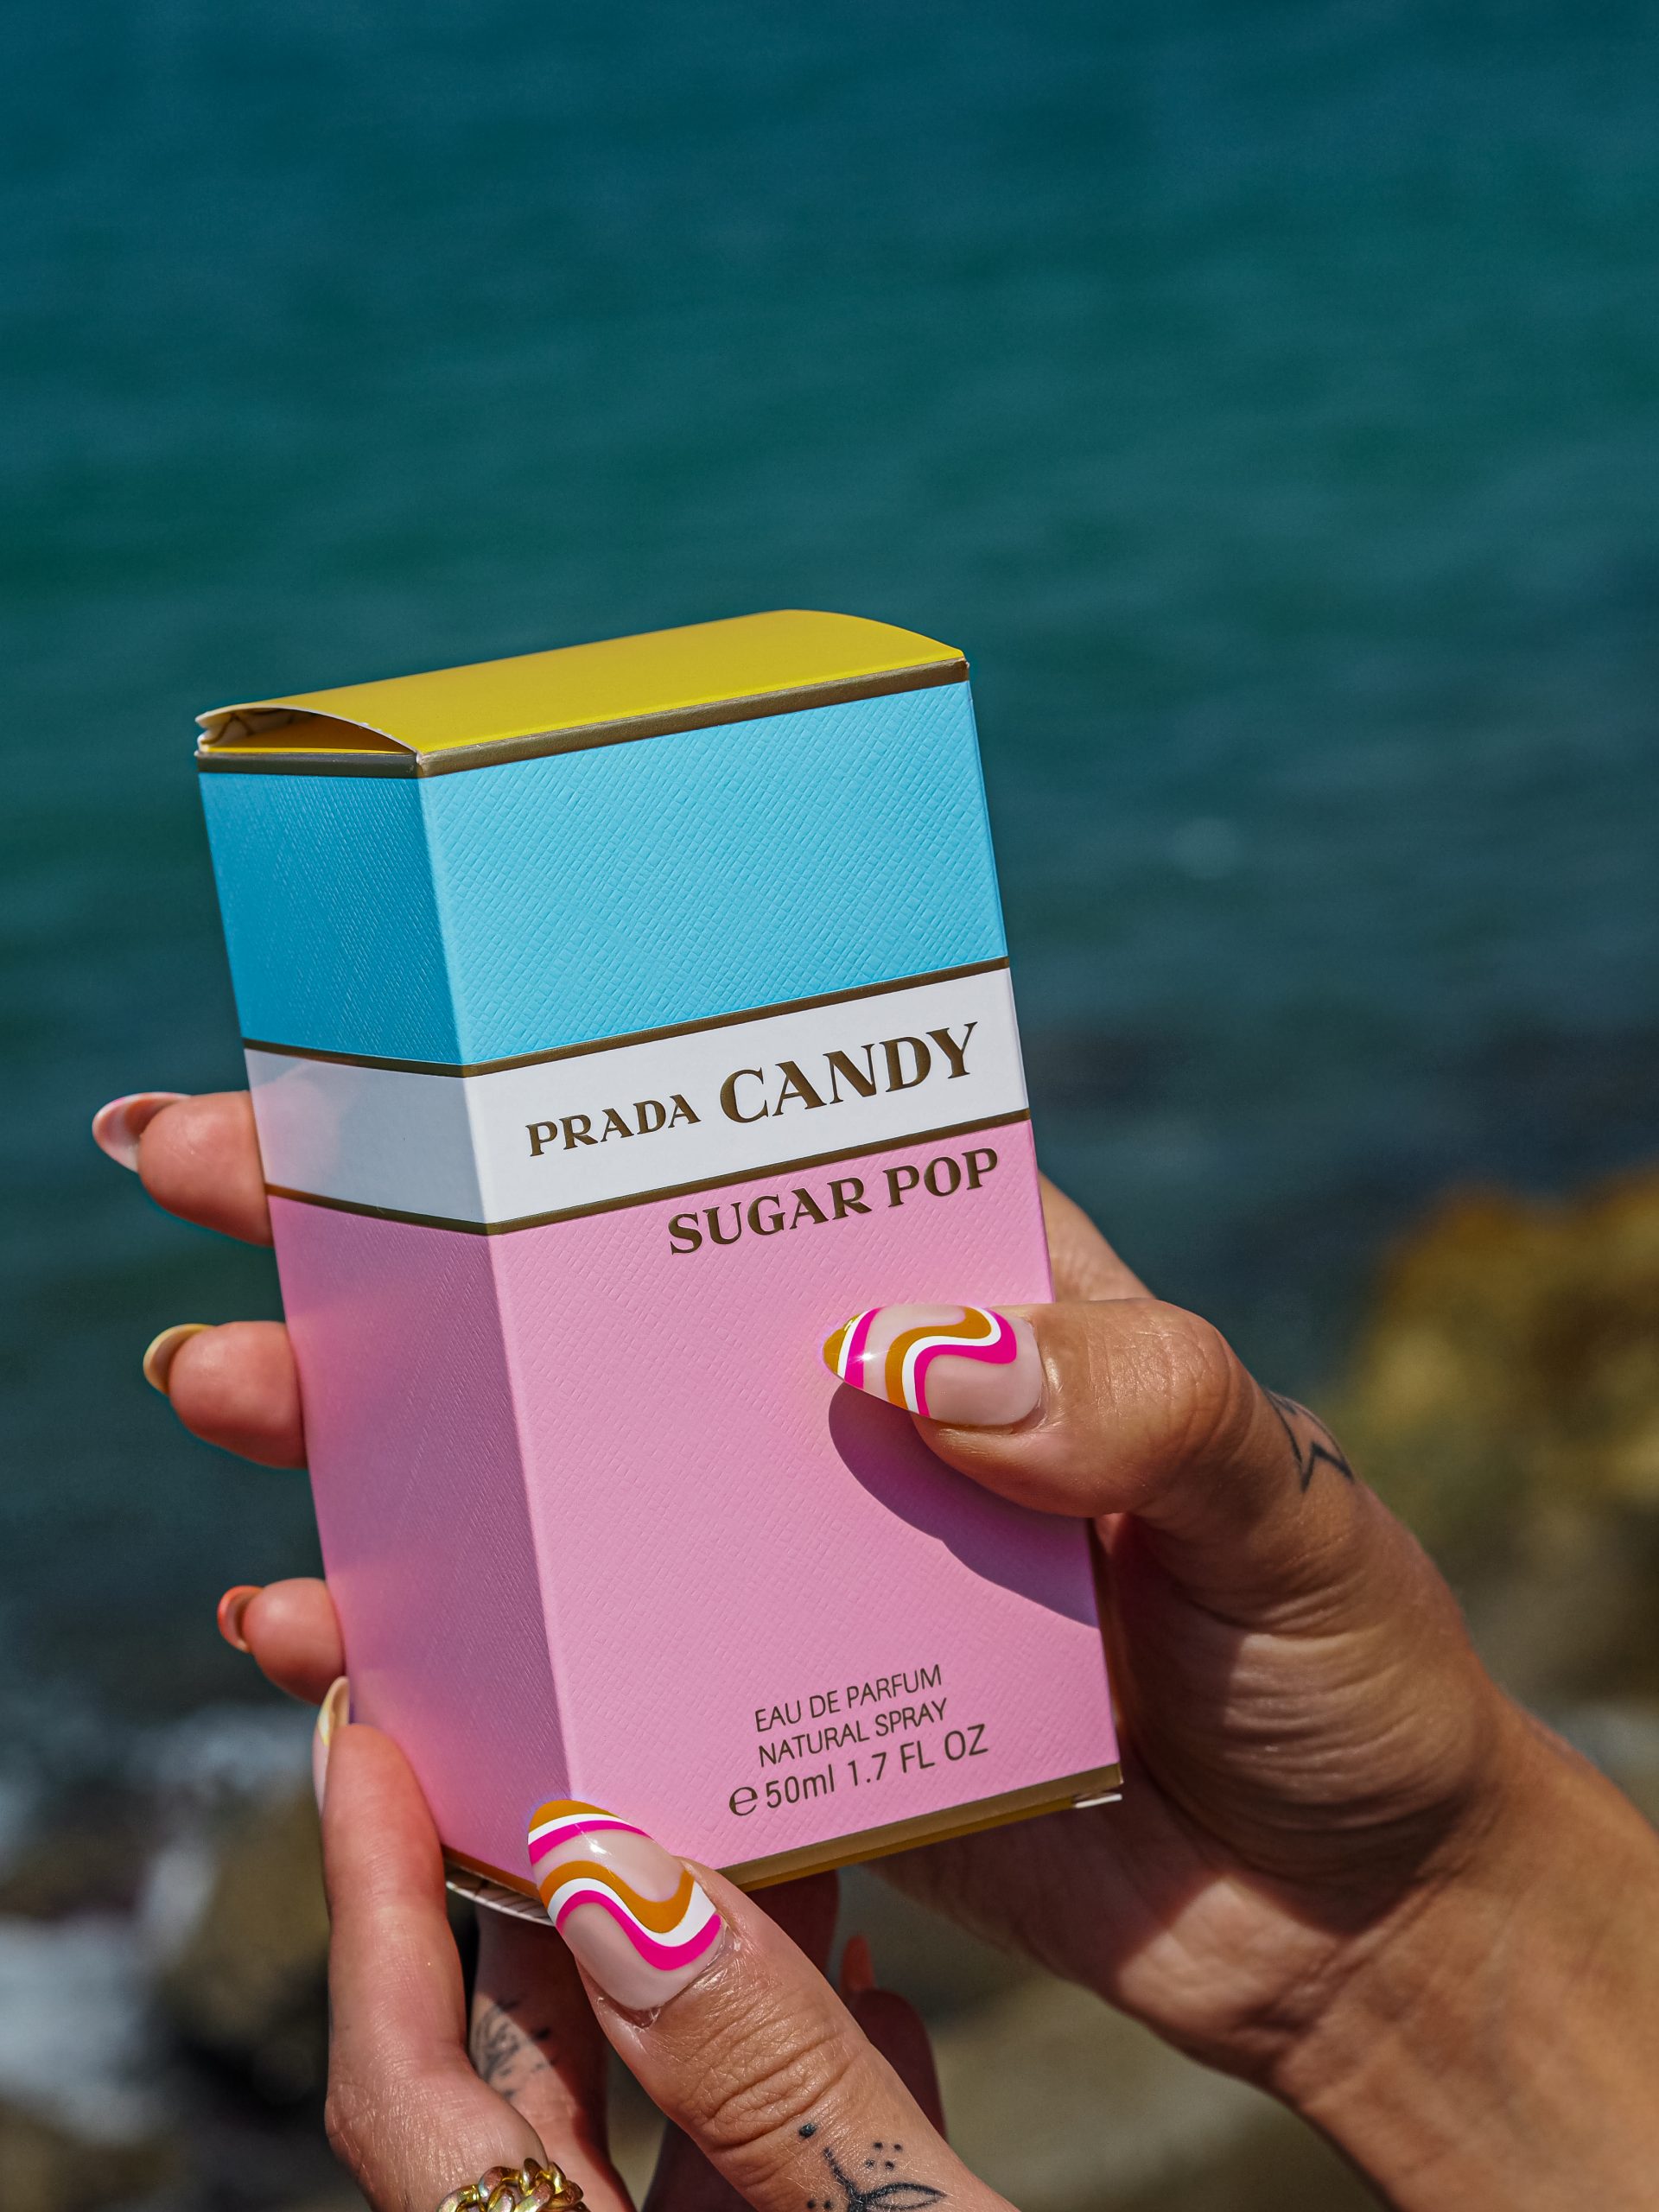 Laura Kate Lucas - Manchester Travel, Fashion and Lifestyle Blogger | Prada Candy Sugar Pop from Perfume Direct